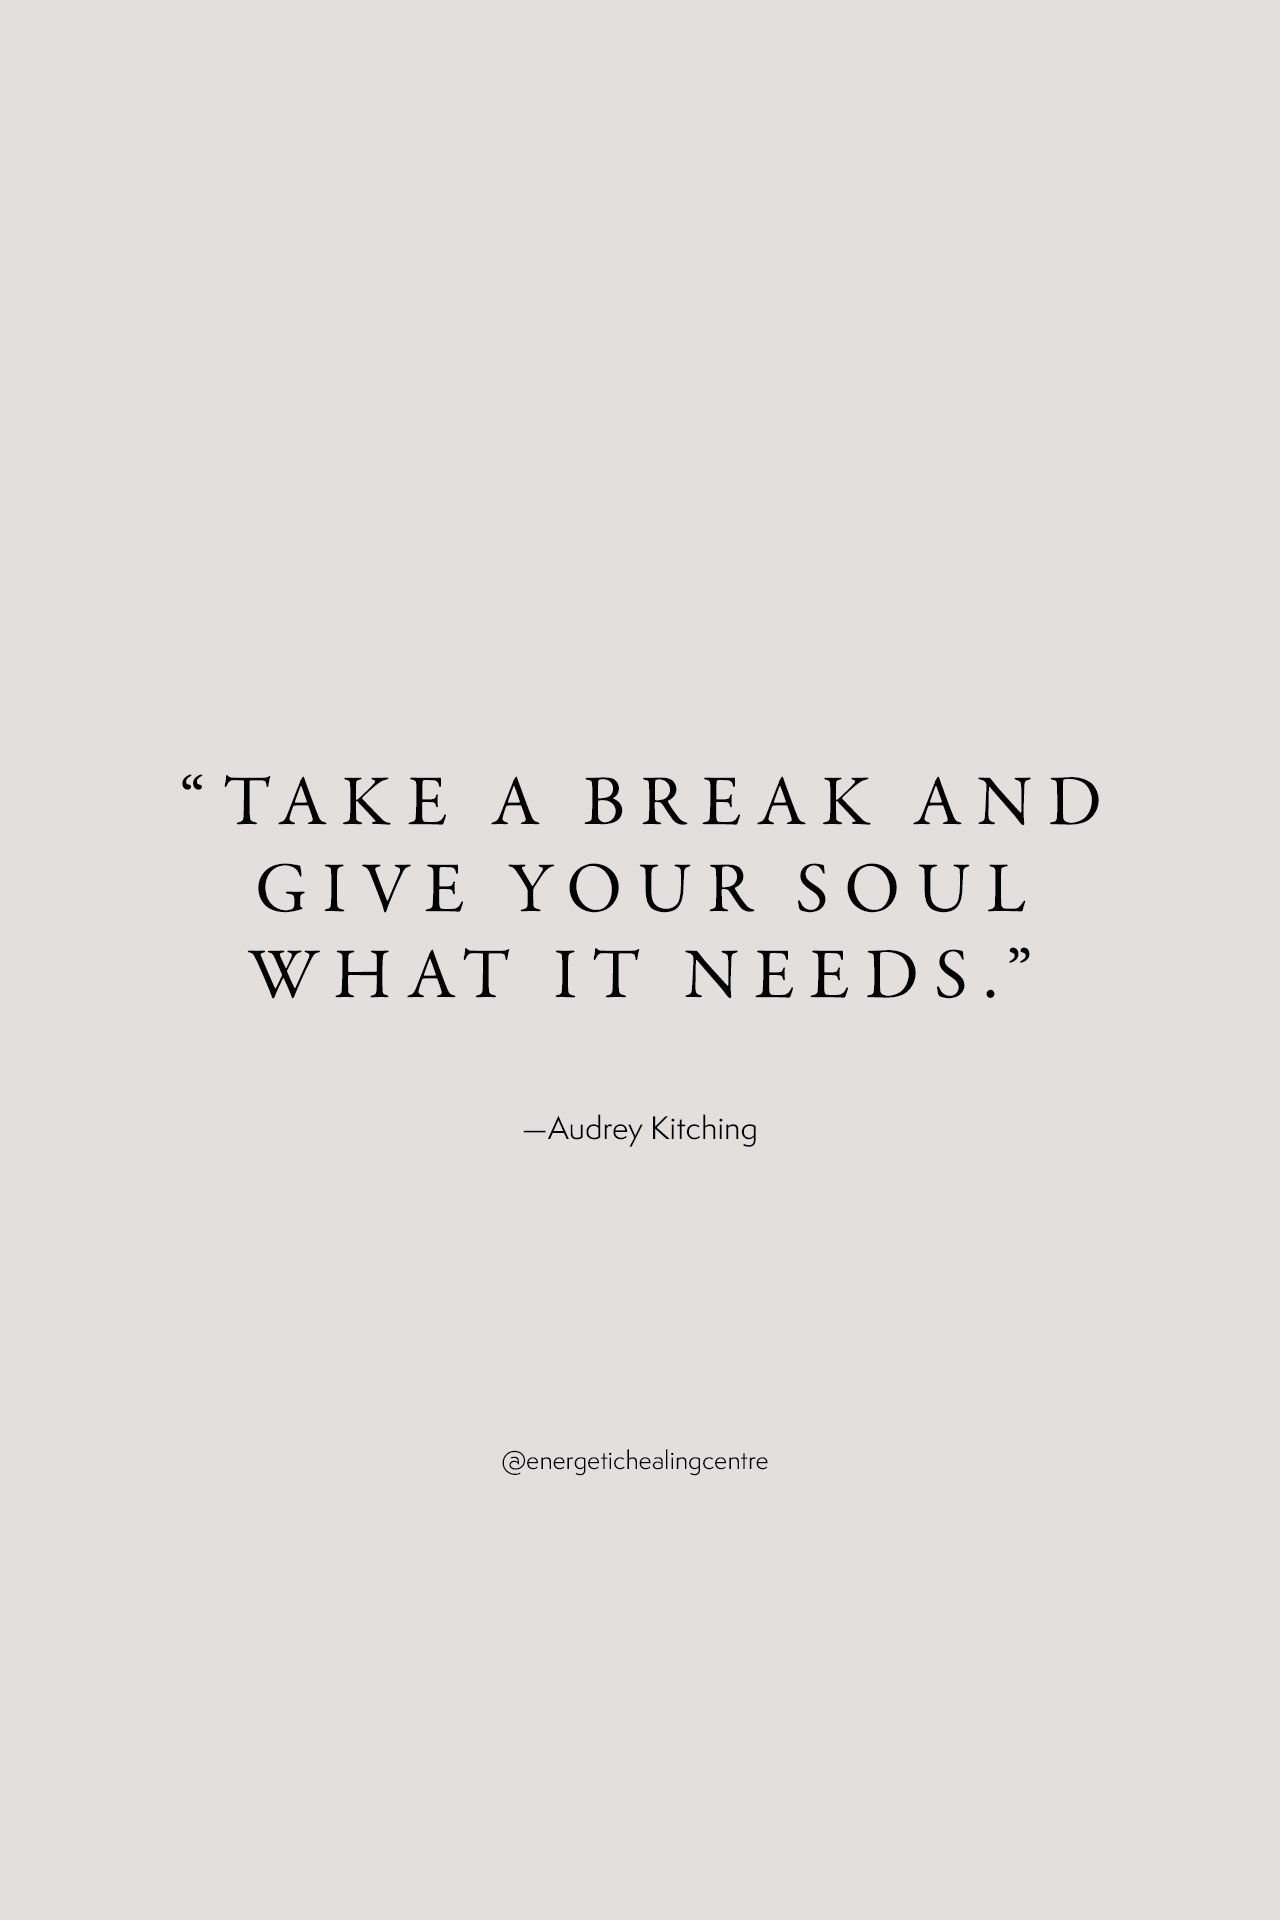 Take a break and give your soul what it needs. – Audrey Kitching- quotes on taking breaks